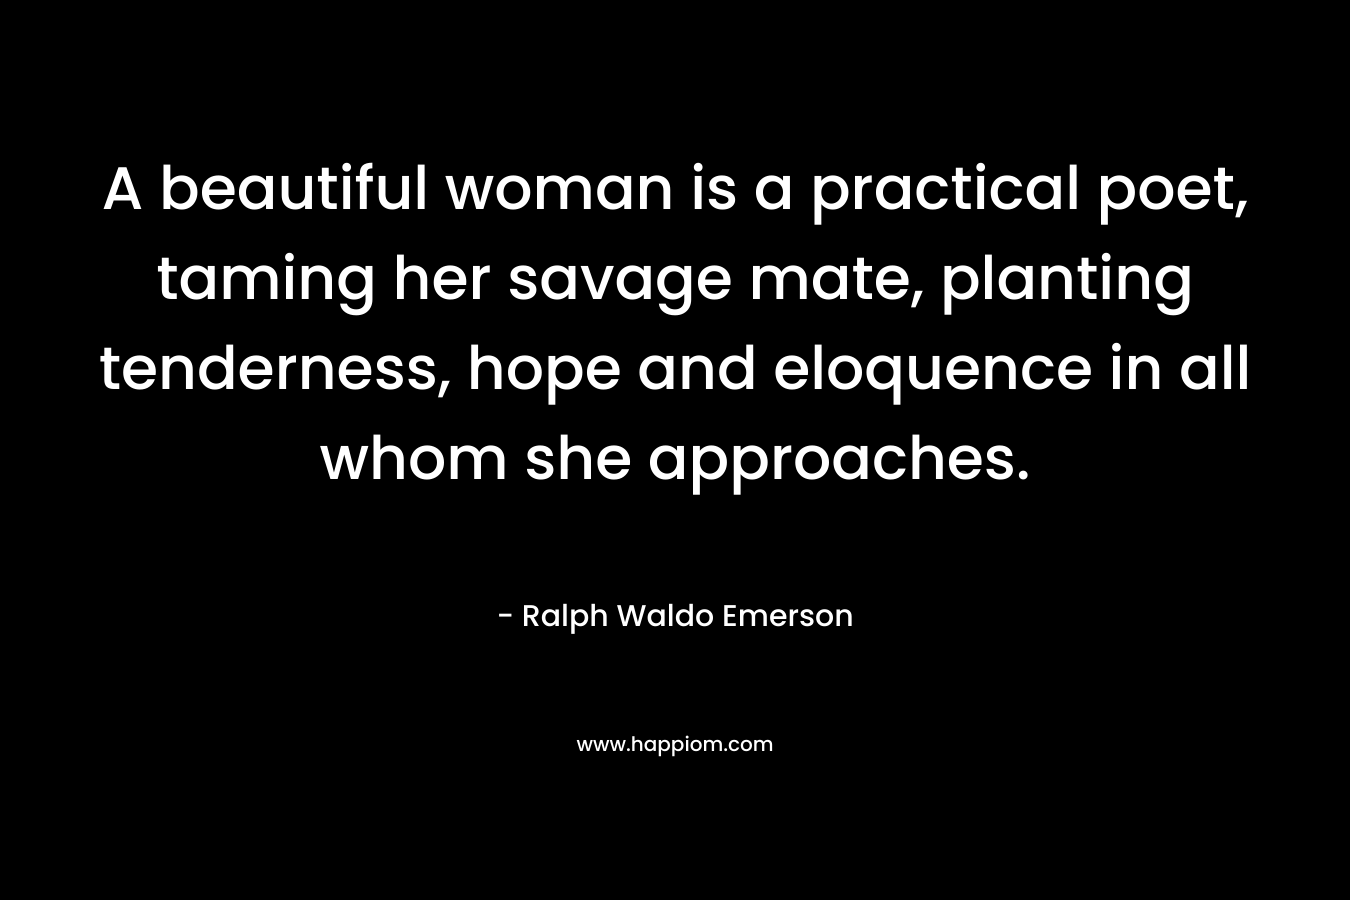 A beautiful woman is a practical poet, taming her savage mate, planting tenderness, hope and eloquence in all whom she approaches.